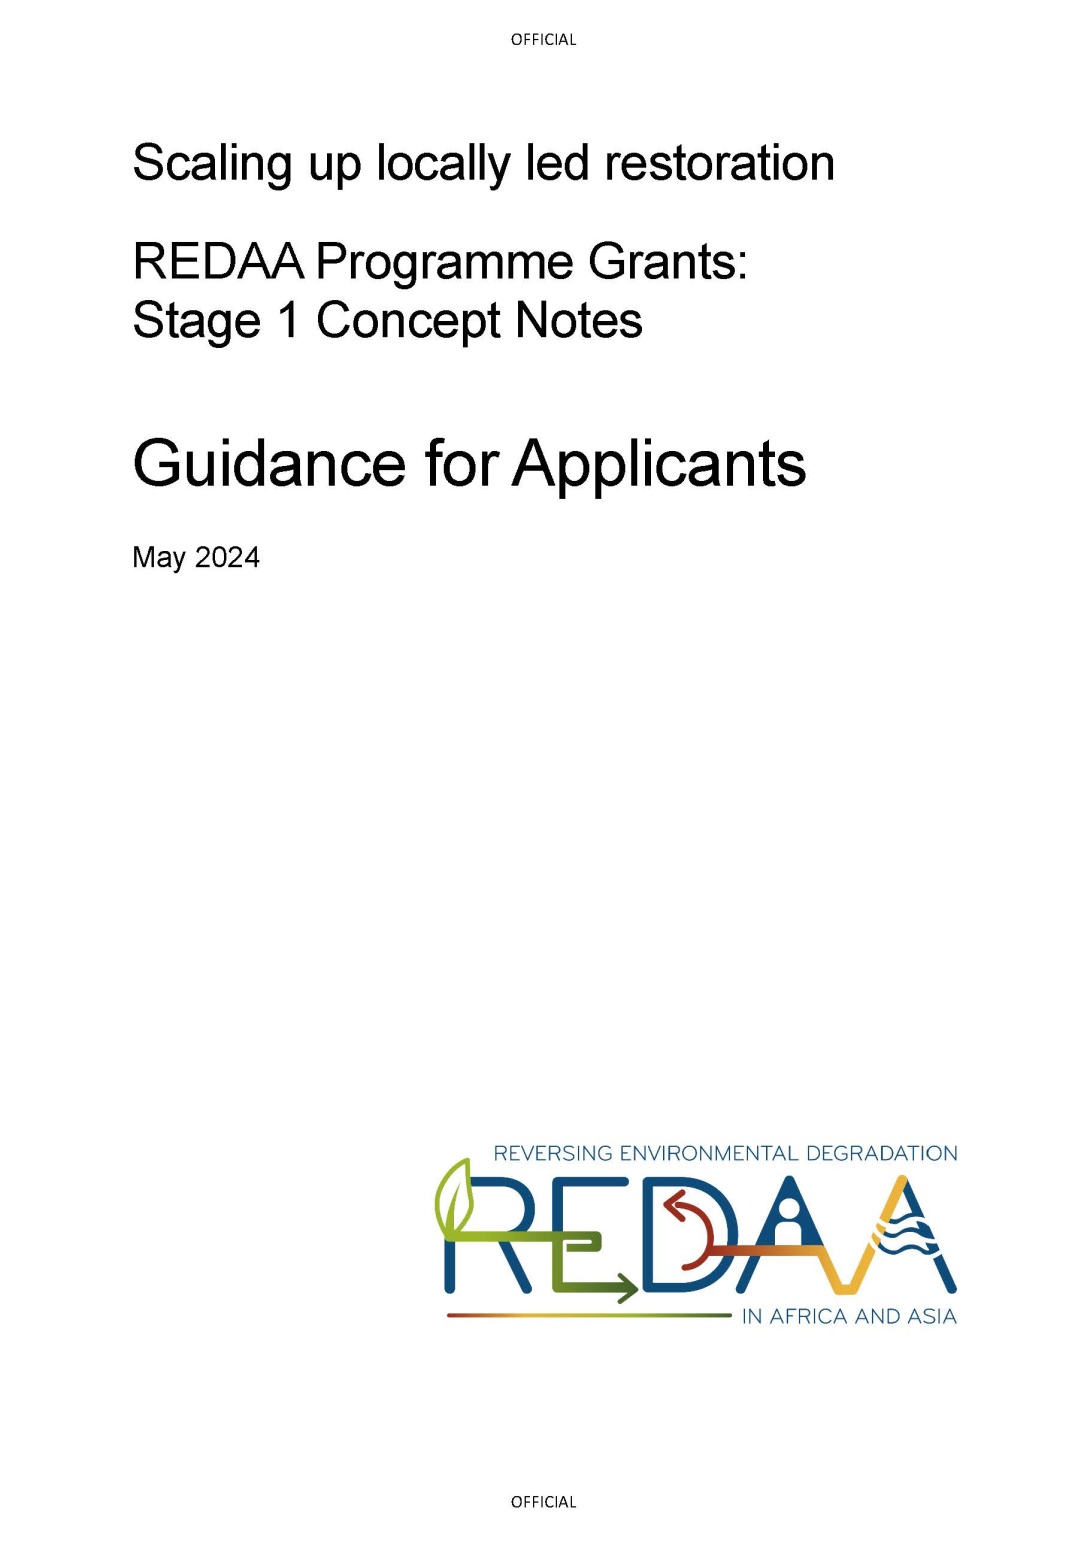 Cover of Guidance for Applicants